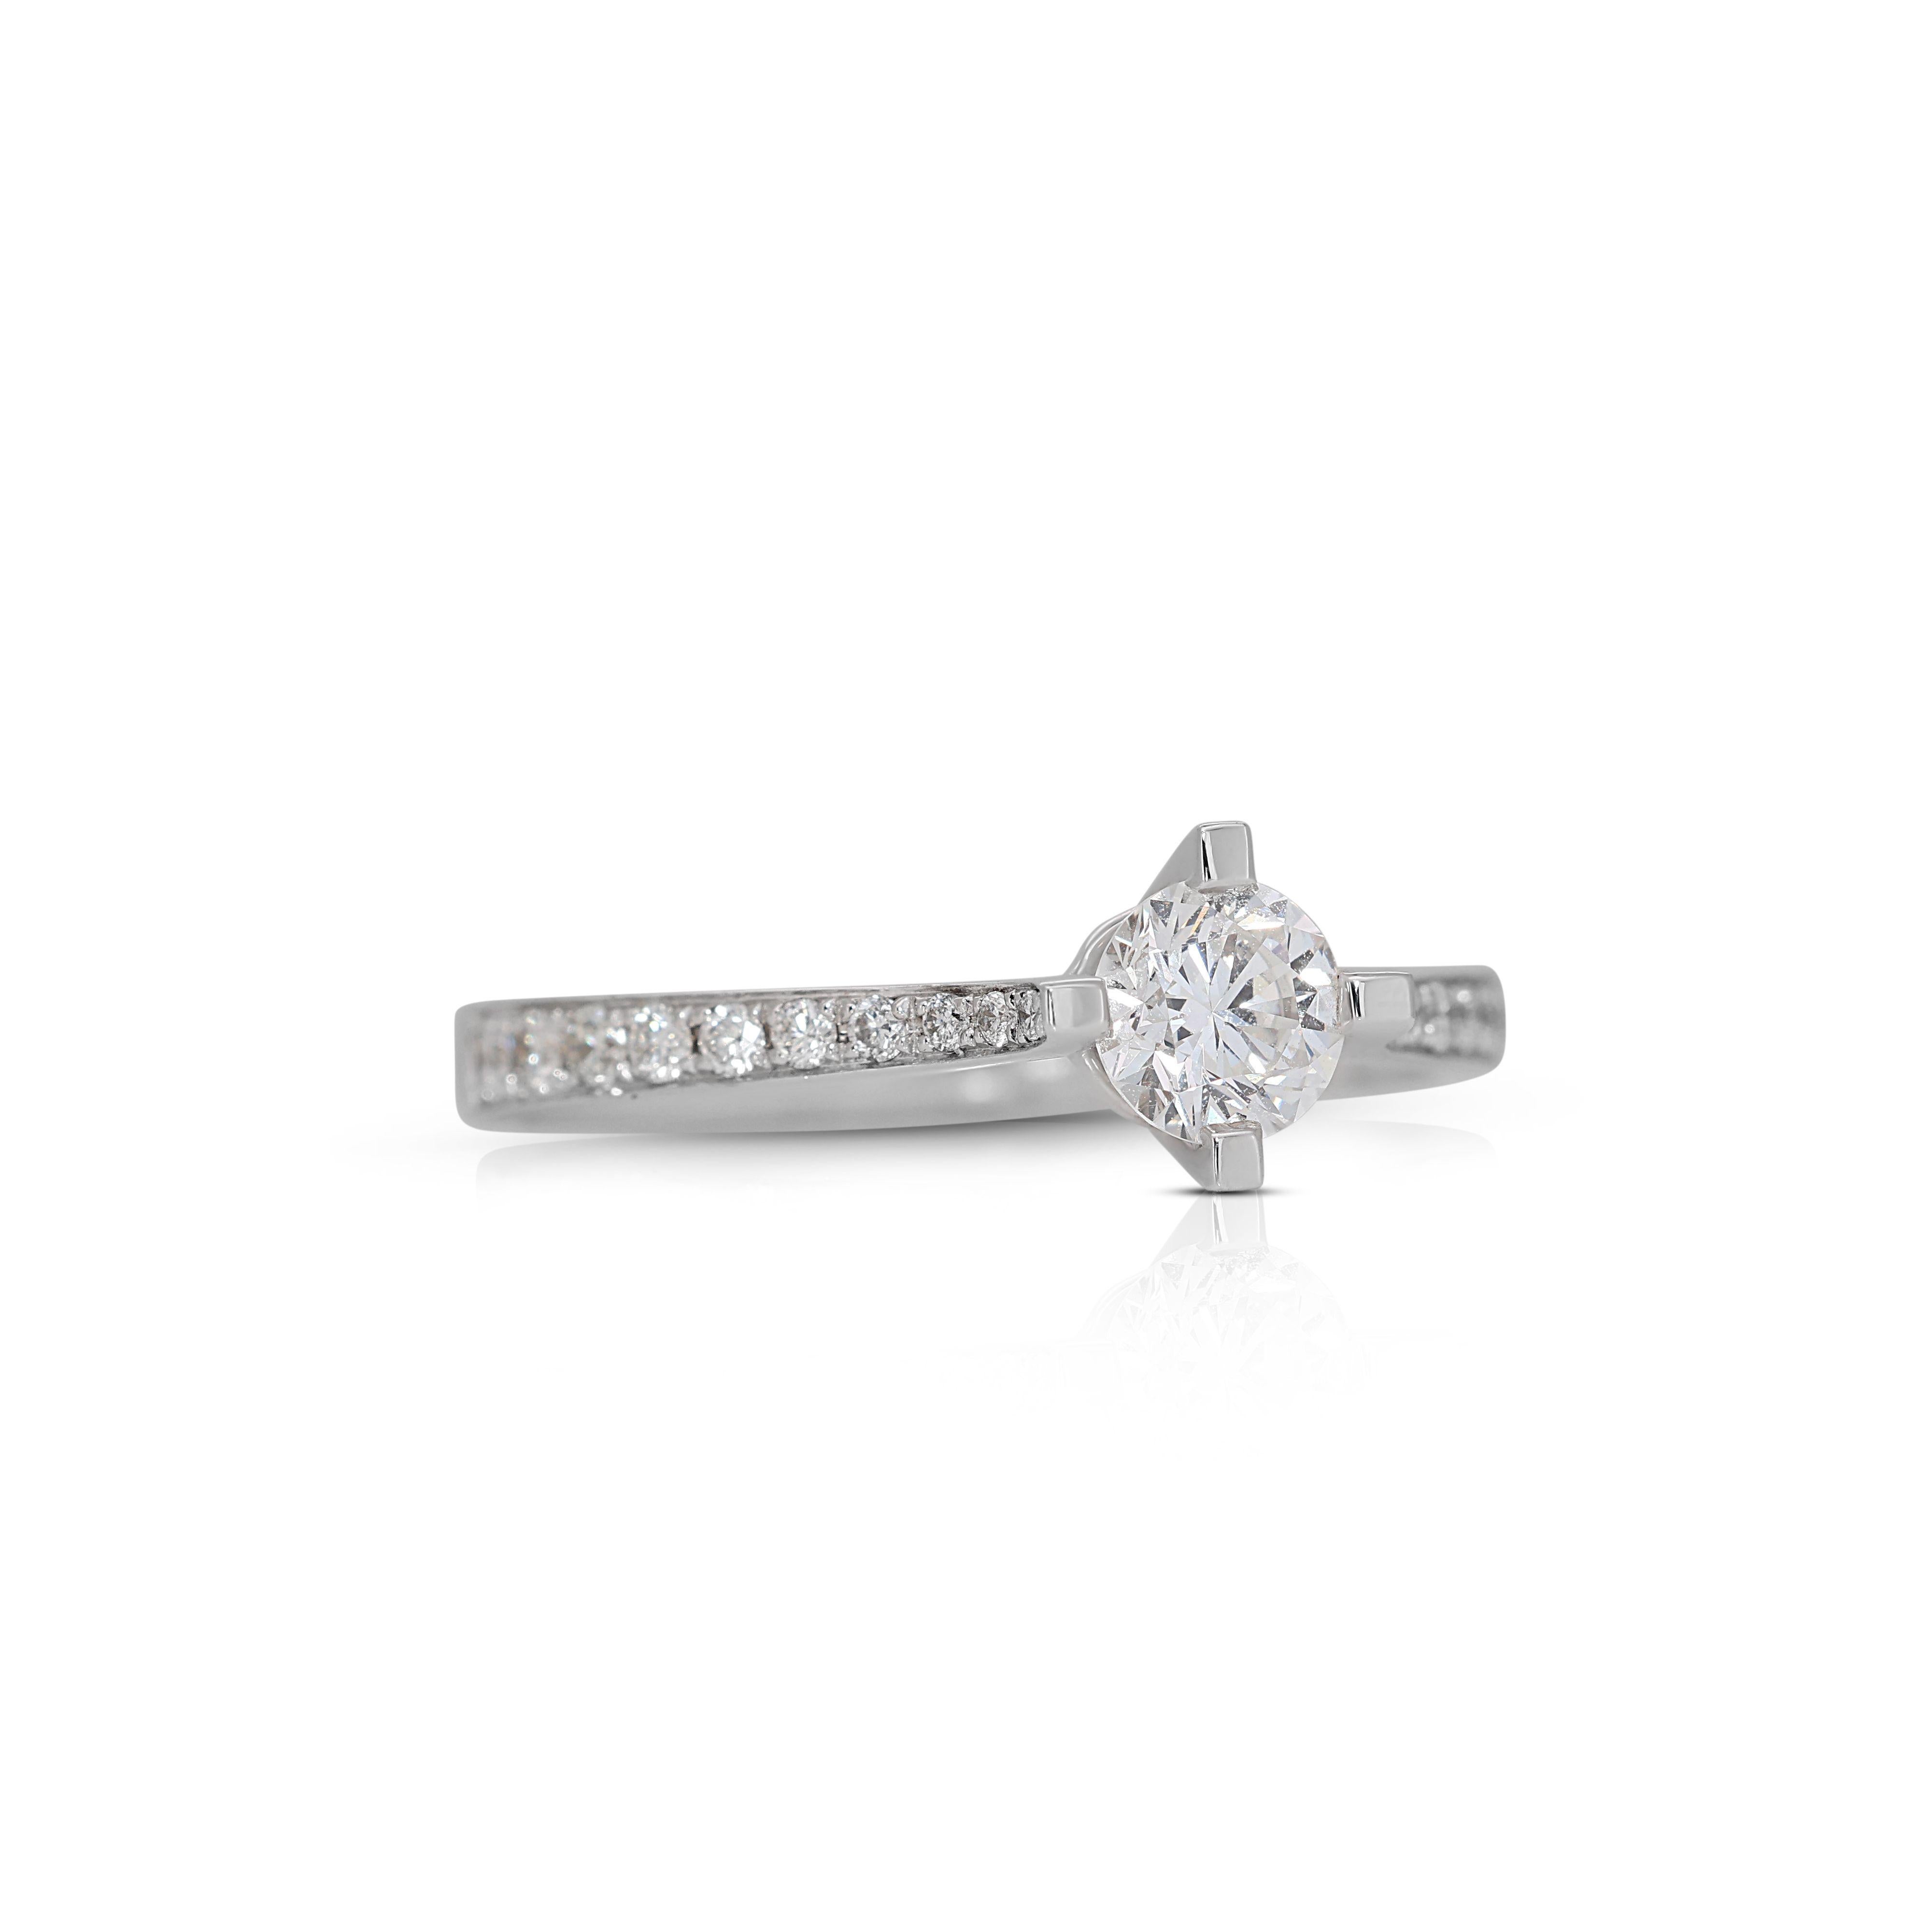 Beautiful 4 Prong Solitaire with Pave Setting made from 18K White Gold with 0.74 total carat of natural round brilliant diamonds. This ring set comes with a GIA certificate for the center stone.

-1 diamond main stone of 0.50 ct.
cut: round